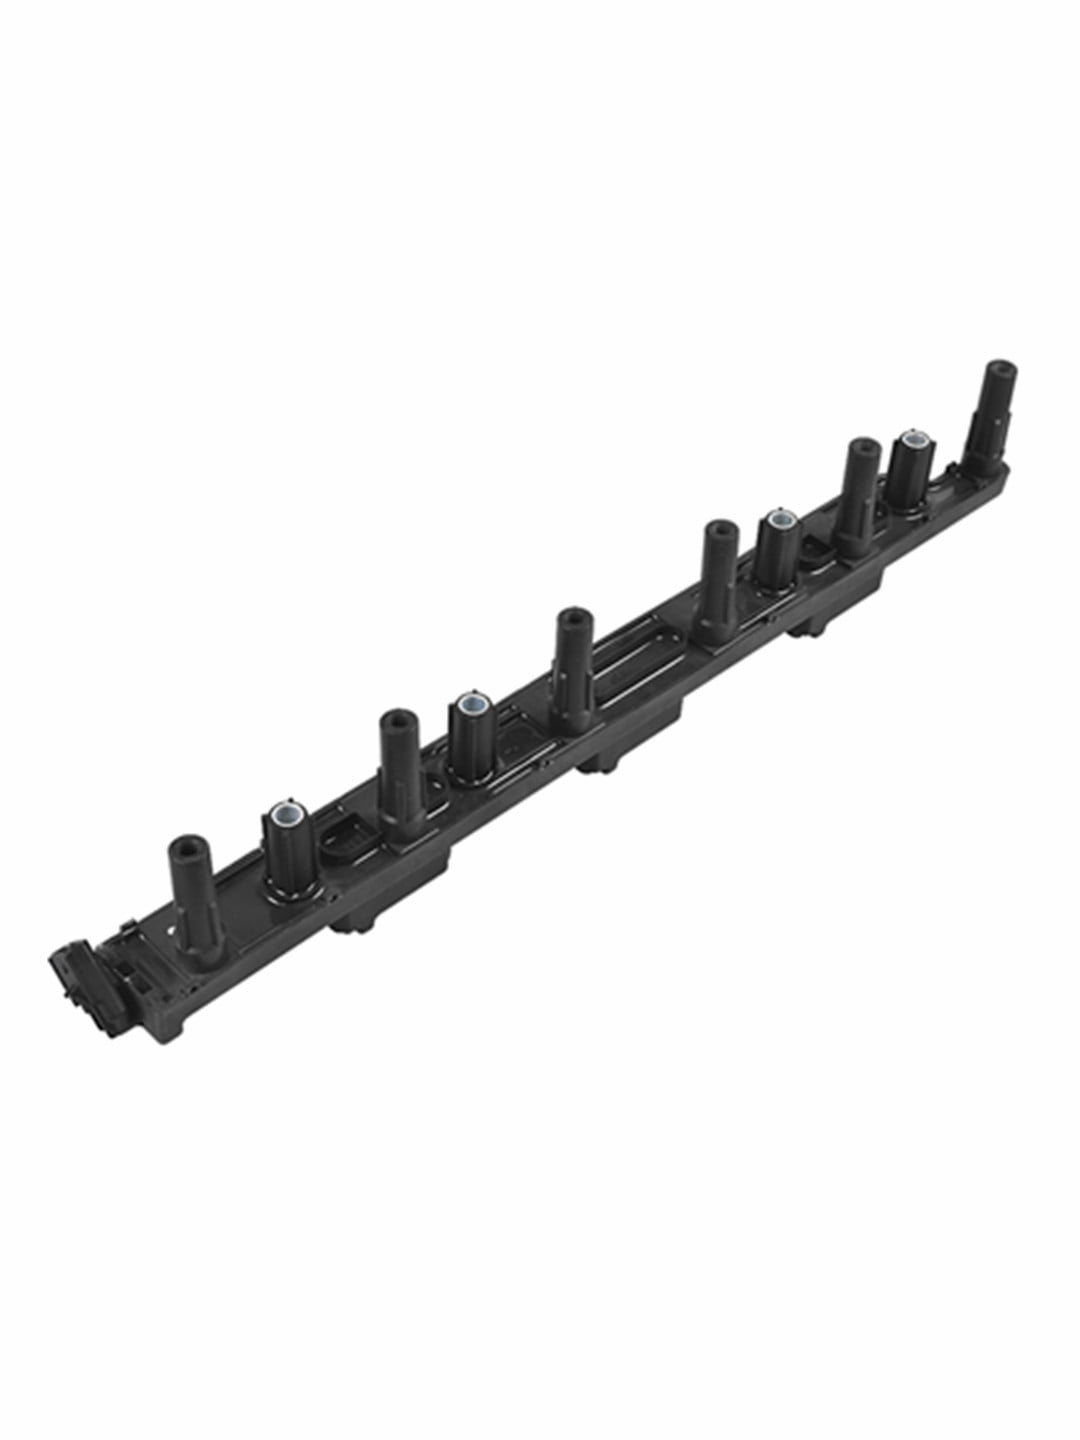 ISA Ignition Coil Pack Compatible with 2000-2006 Jeep Wrangler Cherokee  Grand Cherokee TJ L6  Replacement for C1263 UF-296 